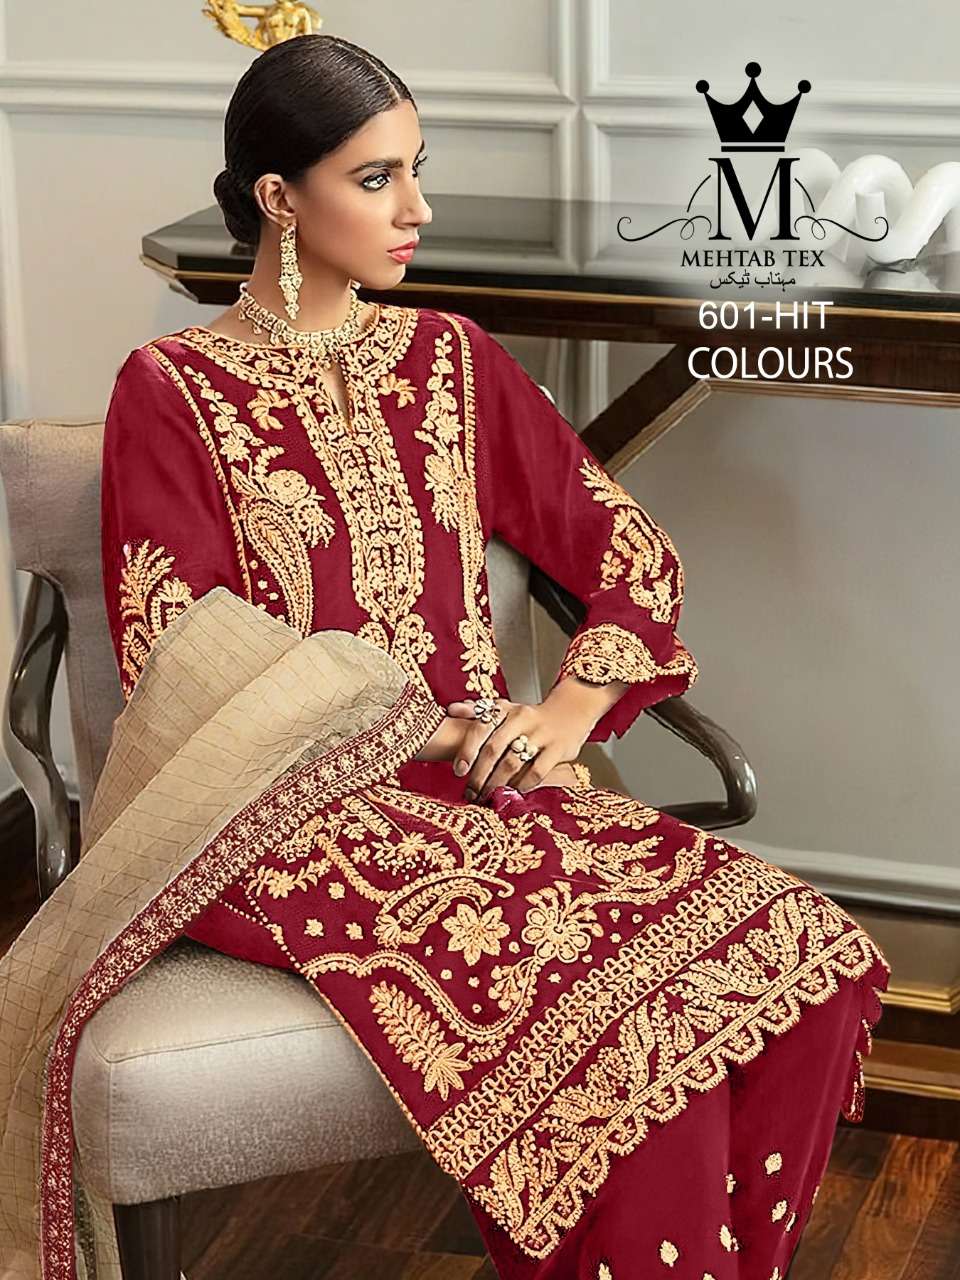 MEHTAB TEX PRESENTS 601 HIT COLOURS INDIAN PAKISTANI SUITS COLLECTION AT WHOLESALE PRICE 3878